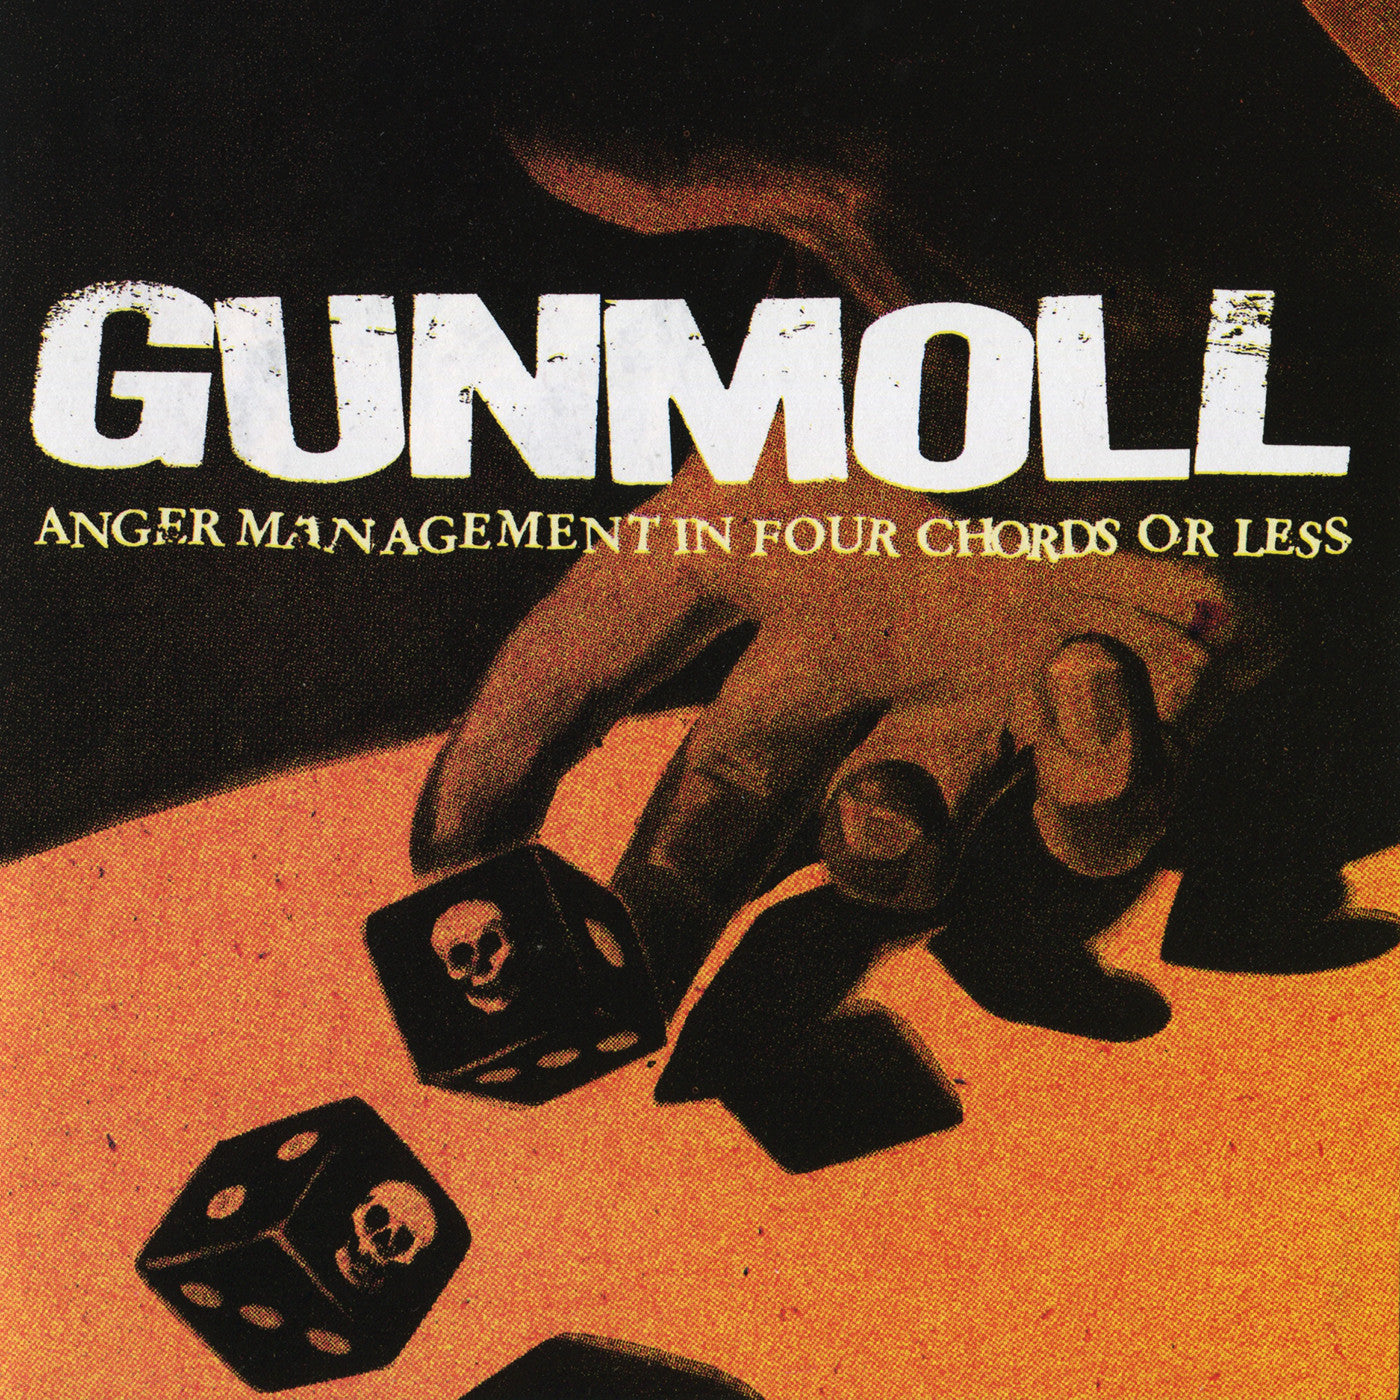 GUNMOLL "Anger Management In Four Chords Or Less"